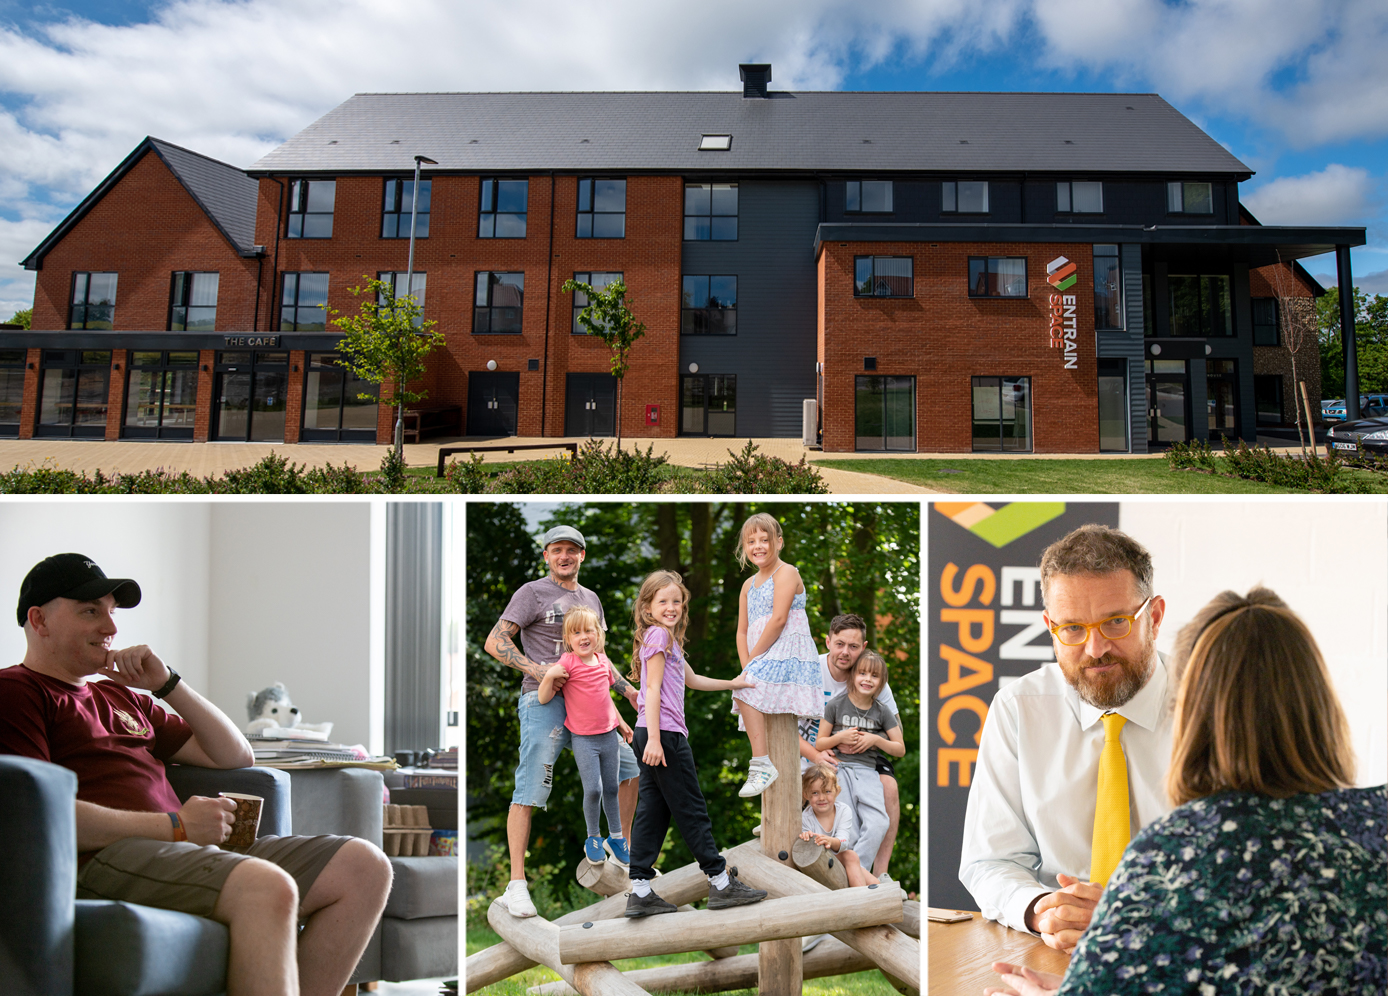 Entrain Space Helps Veterans And Service-Leavers Navigate The ‘New Normal’ With Homes, Jobs And Training Support As Admissions Restart